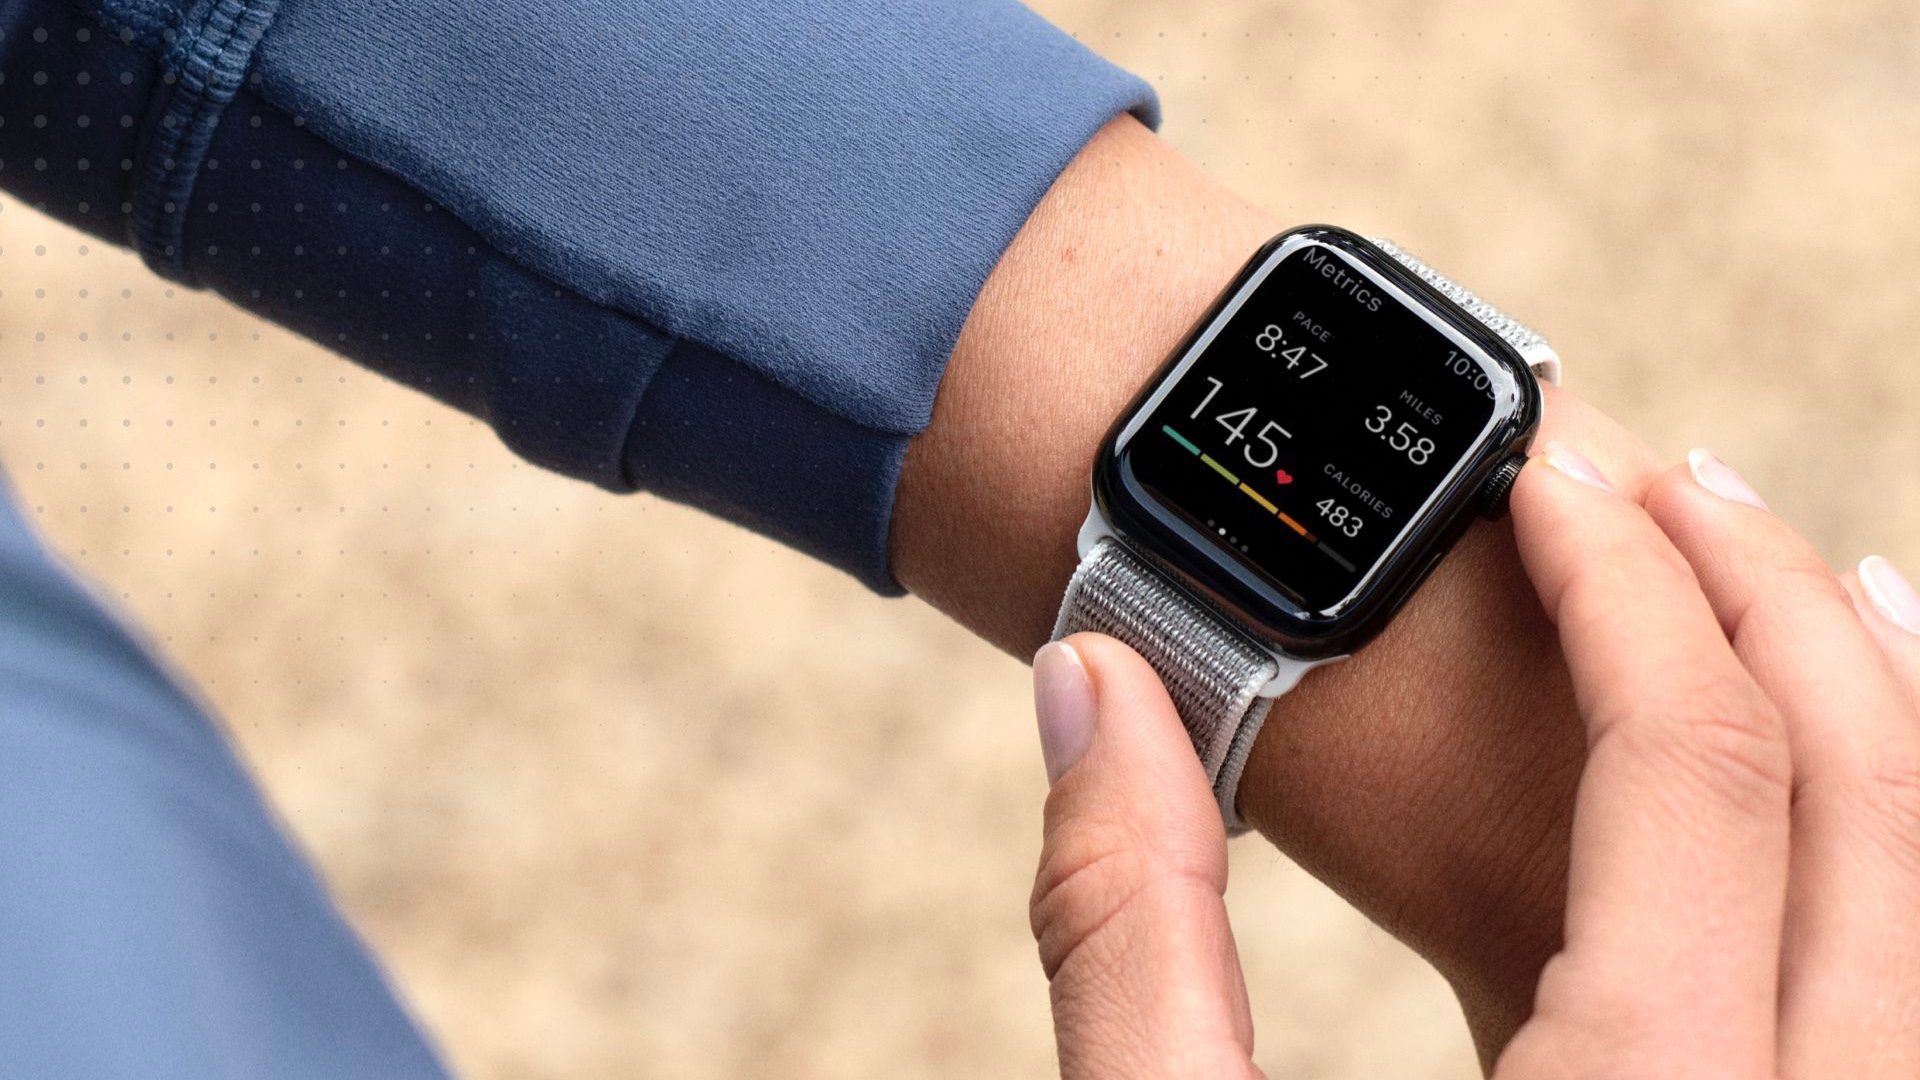 Can you use Apple Watch without an iPhone?